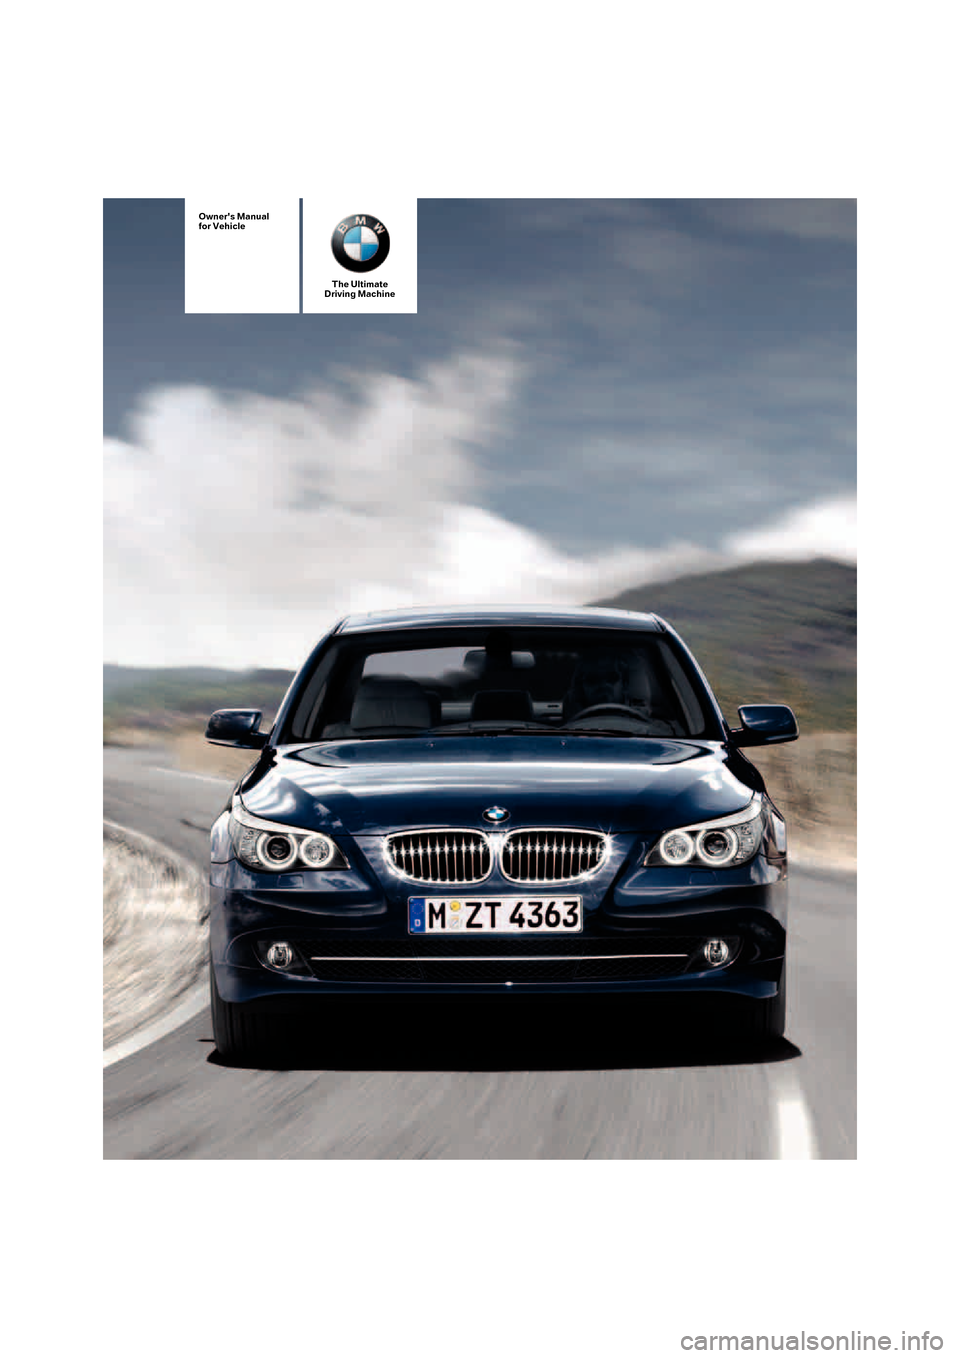 BMW 530I TOURING 2007 E61 Owners Manual The Ultimate
Driving Machine
Owners Manual
for Vehicle 